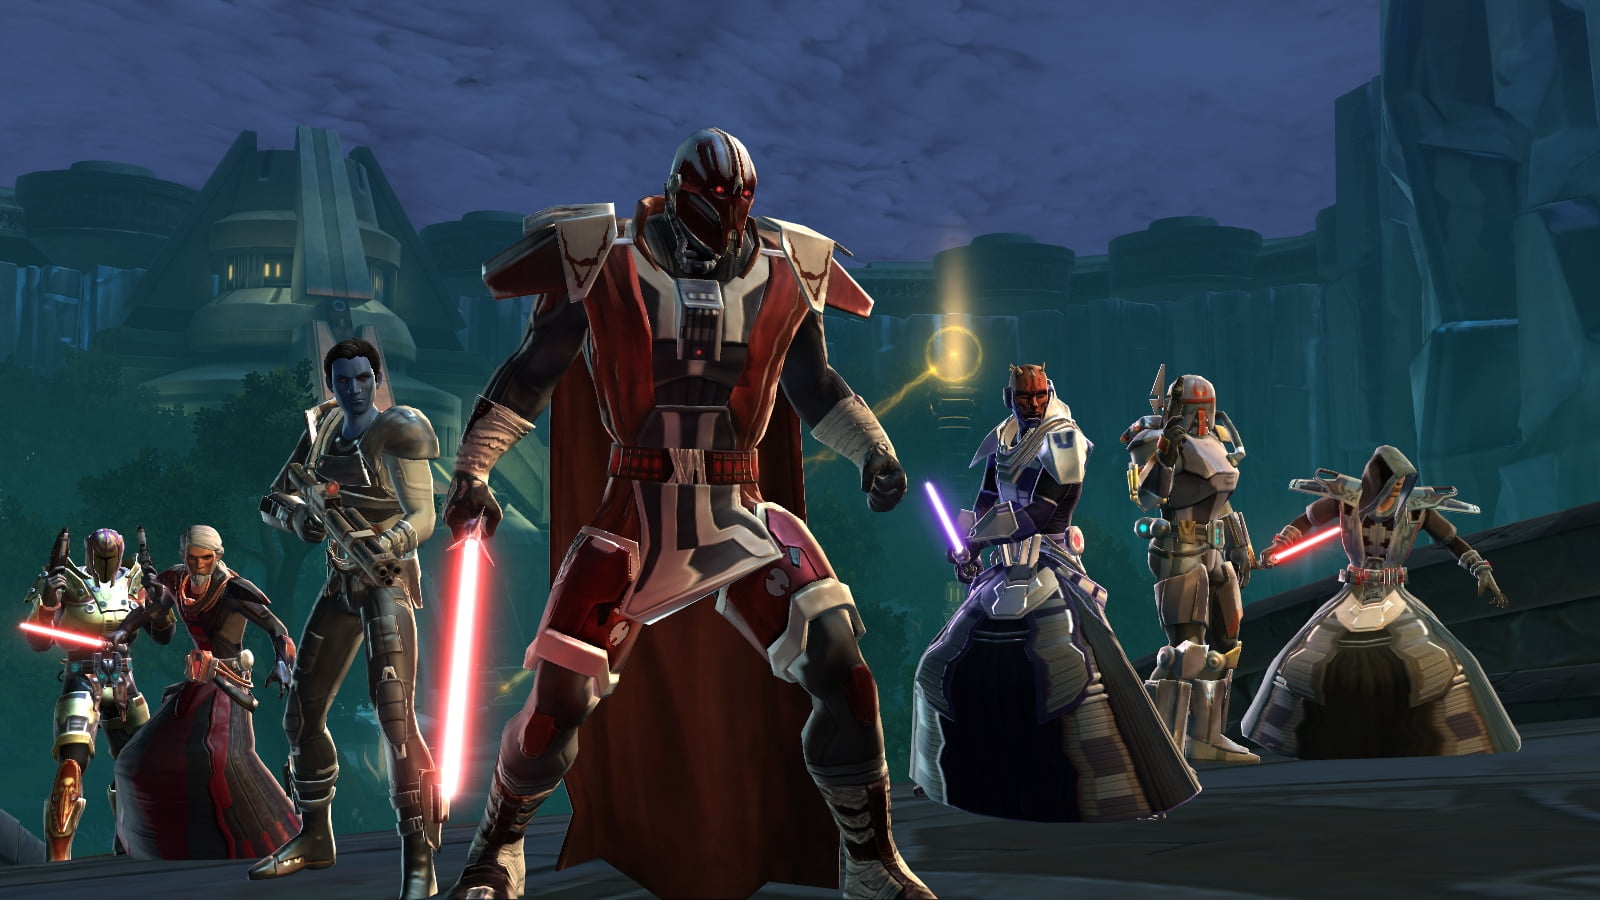 Class swtor pvp SWTOR PvP